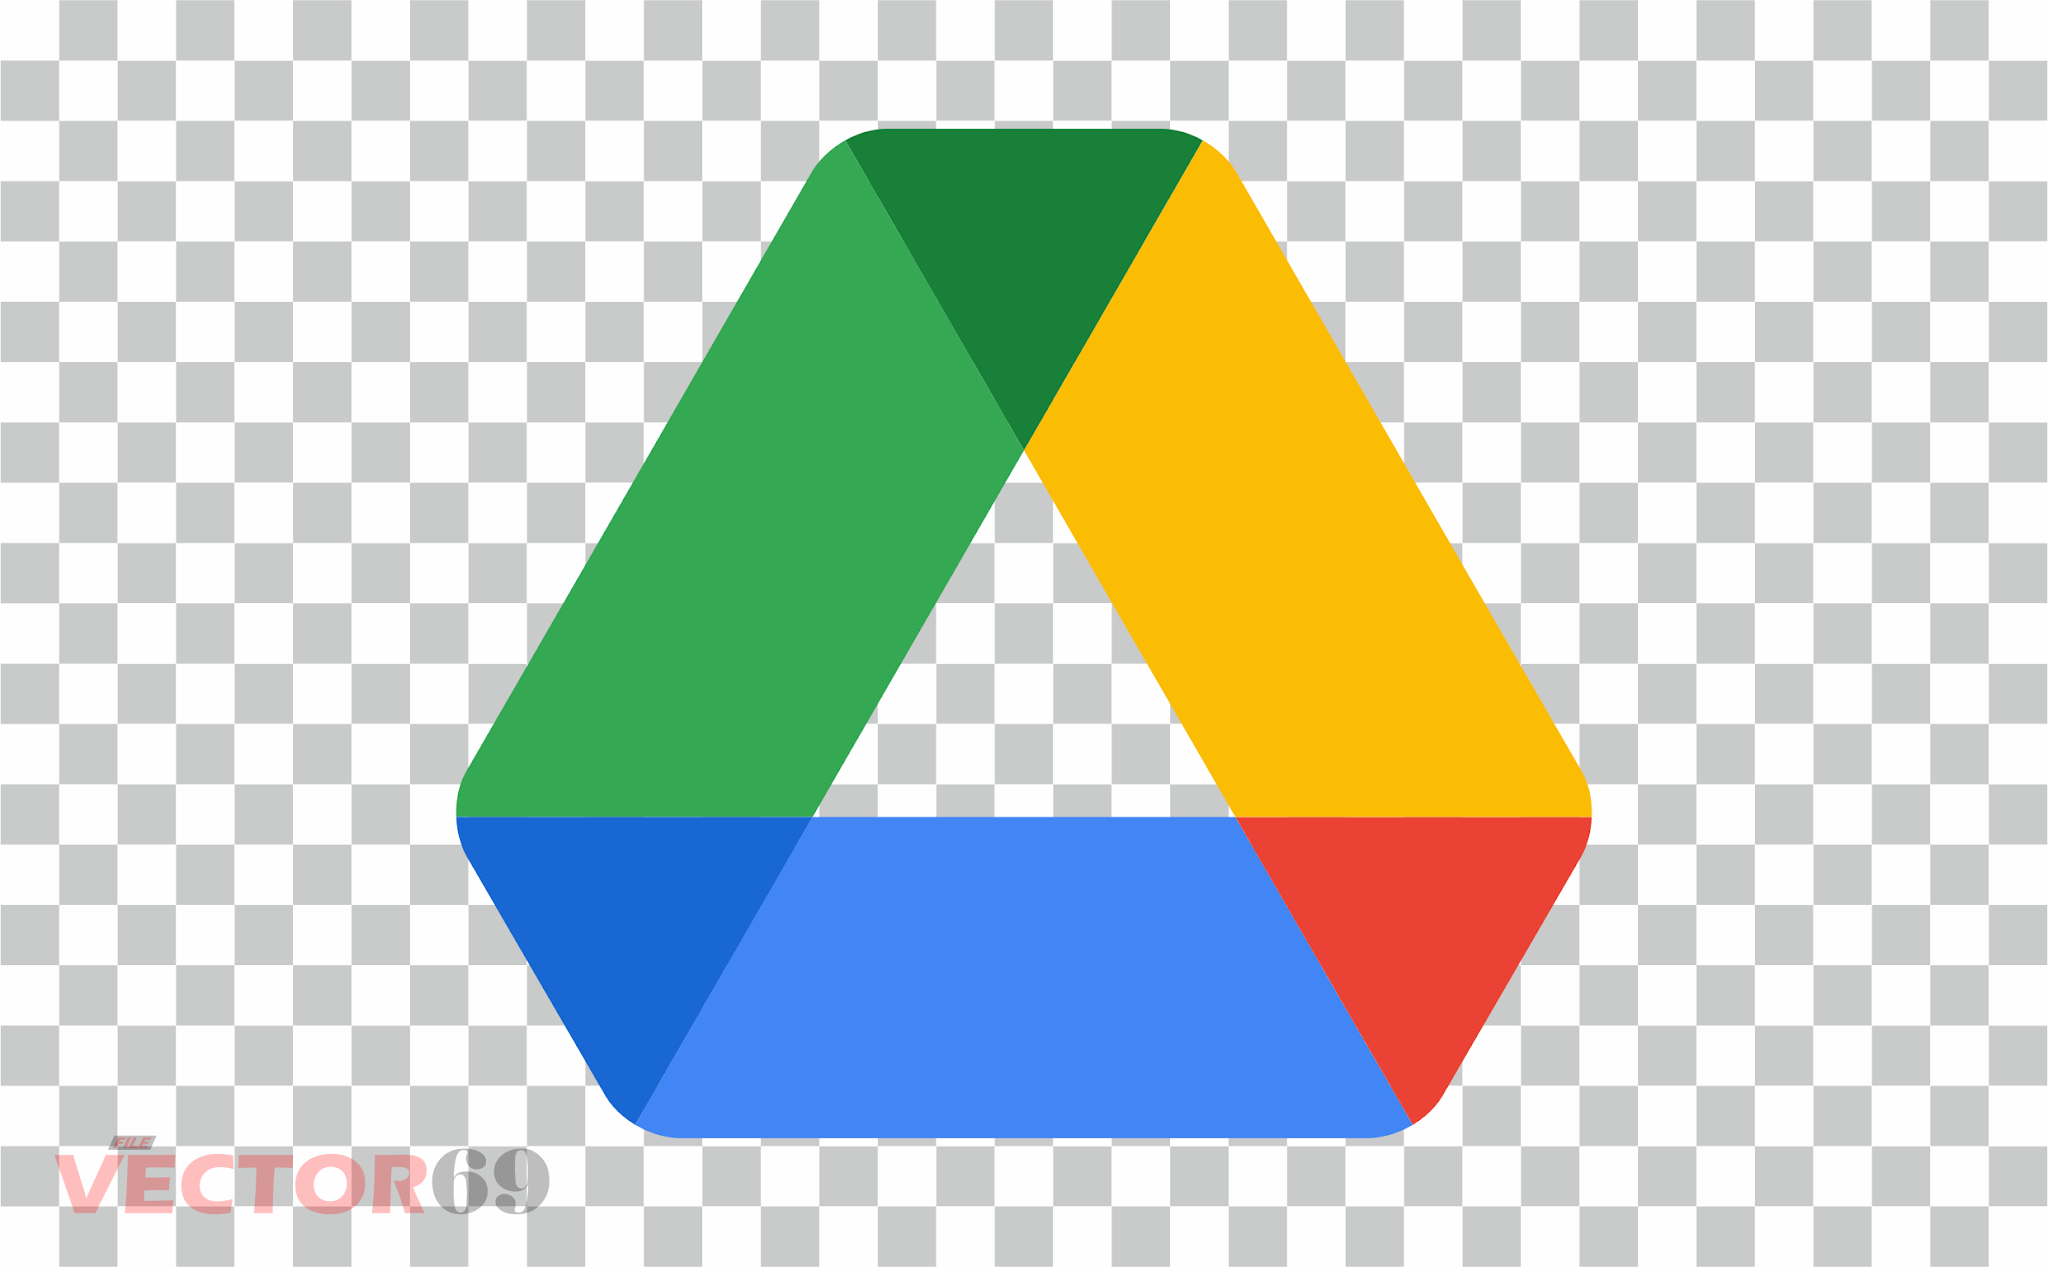 Google Drive New 2020 Logo - Download Vector File PNG (Portable Network Graphics)